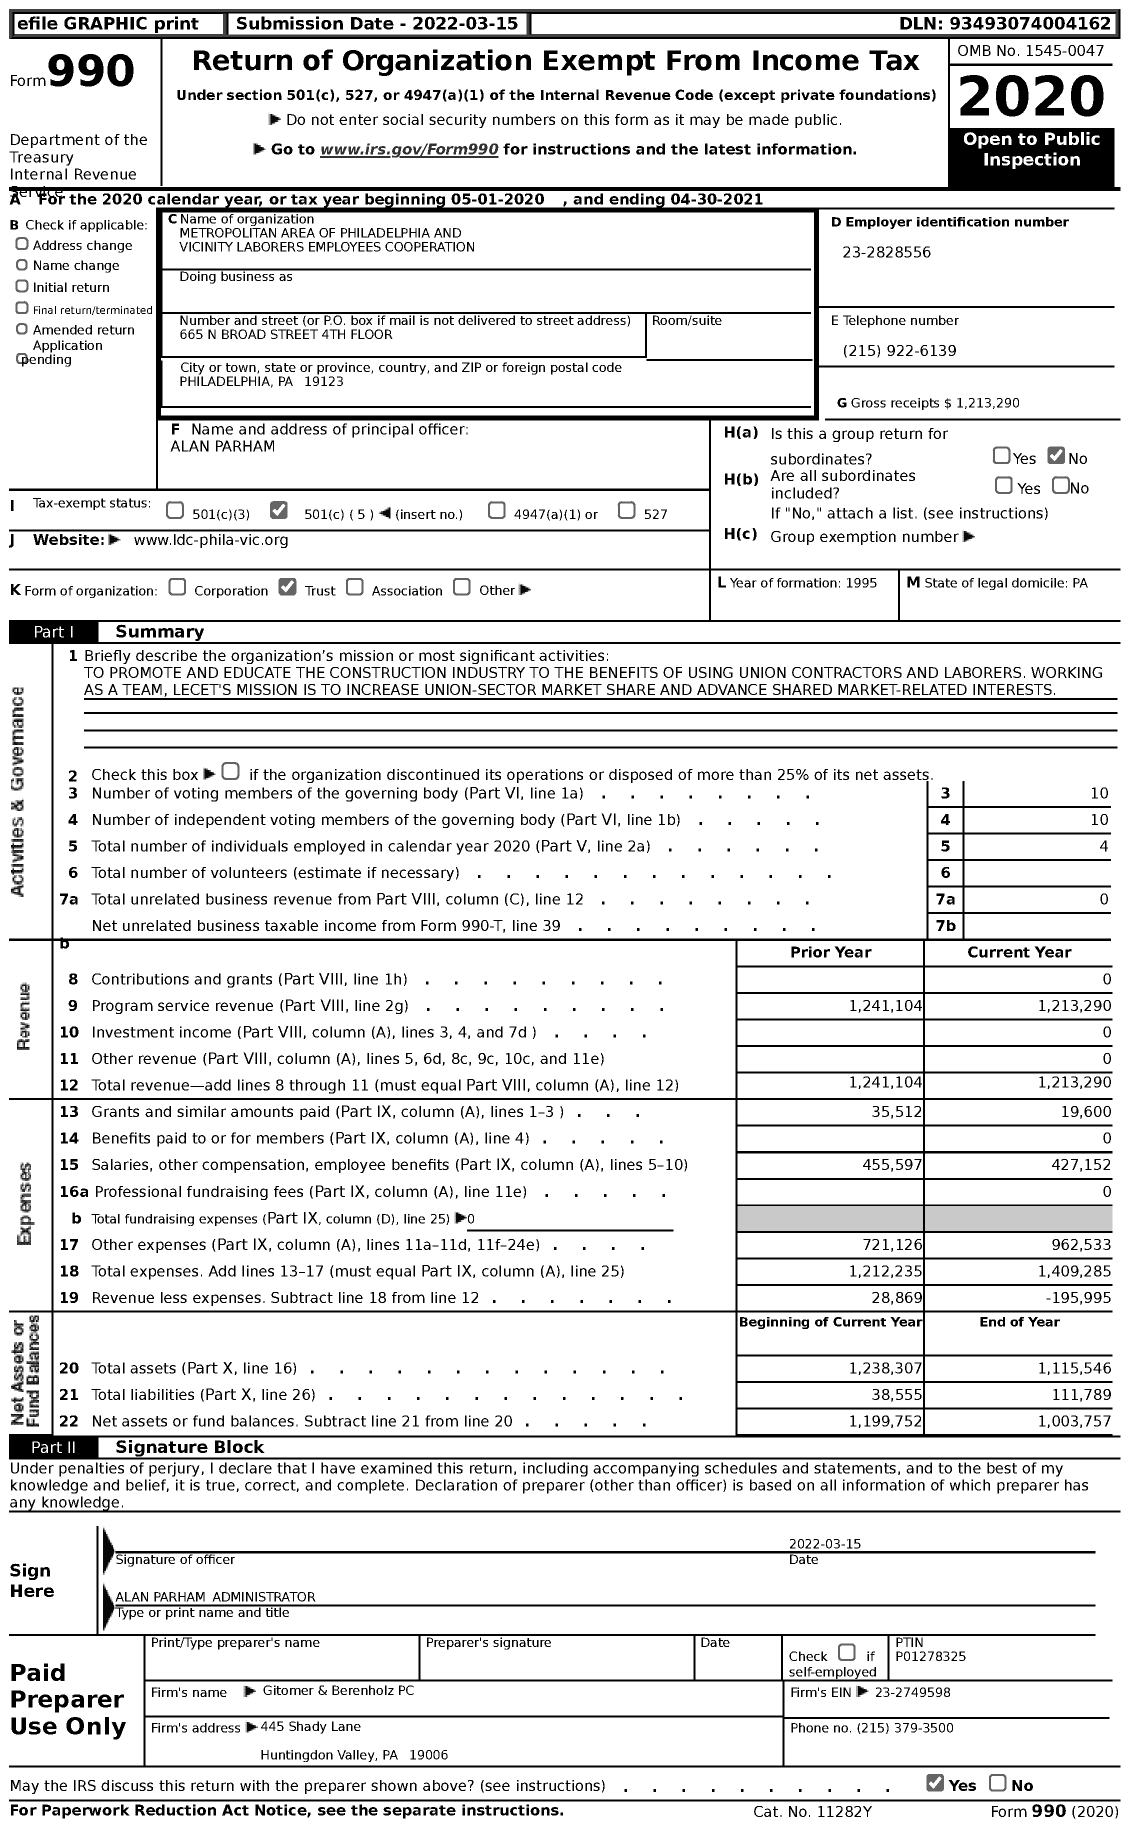 Image of first page of 2020 Form 990 for Metropolitan Area of Philadelphia and Vicinity Laborers Employees Cooperation